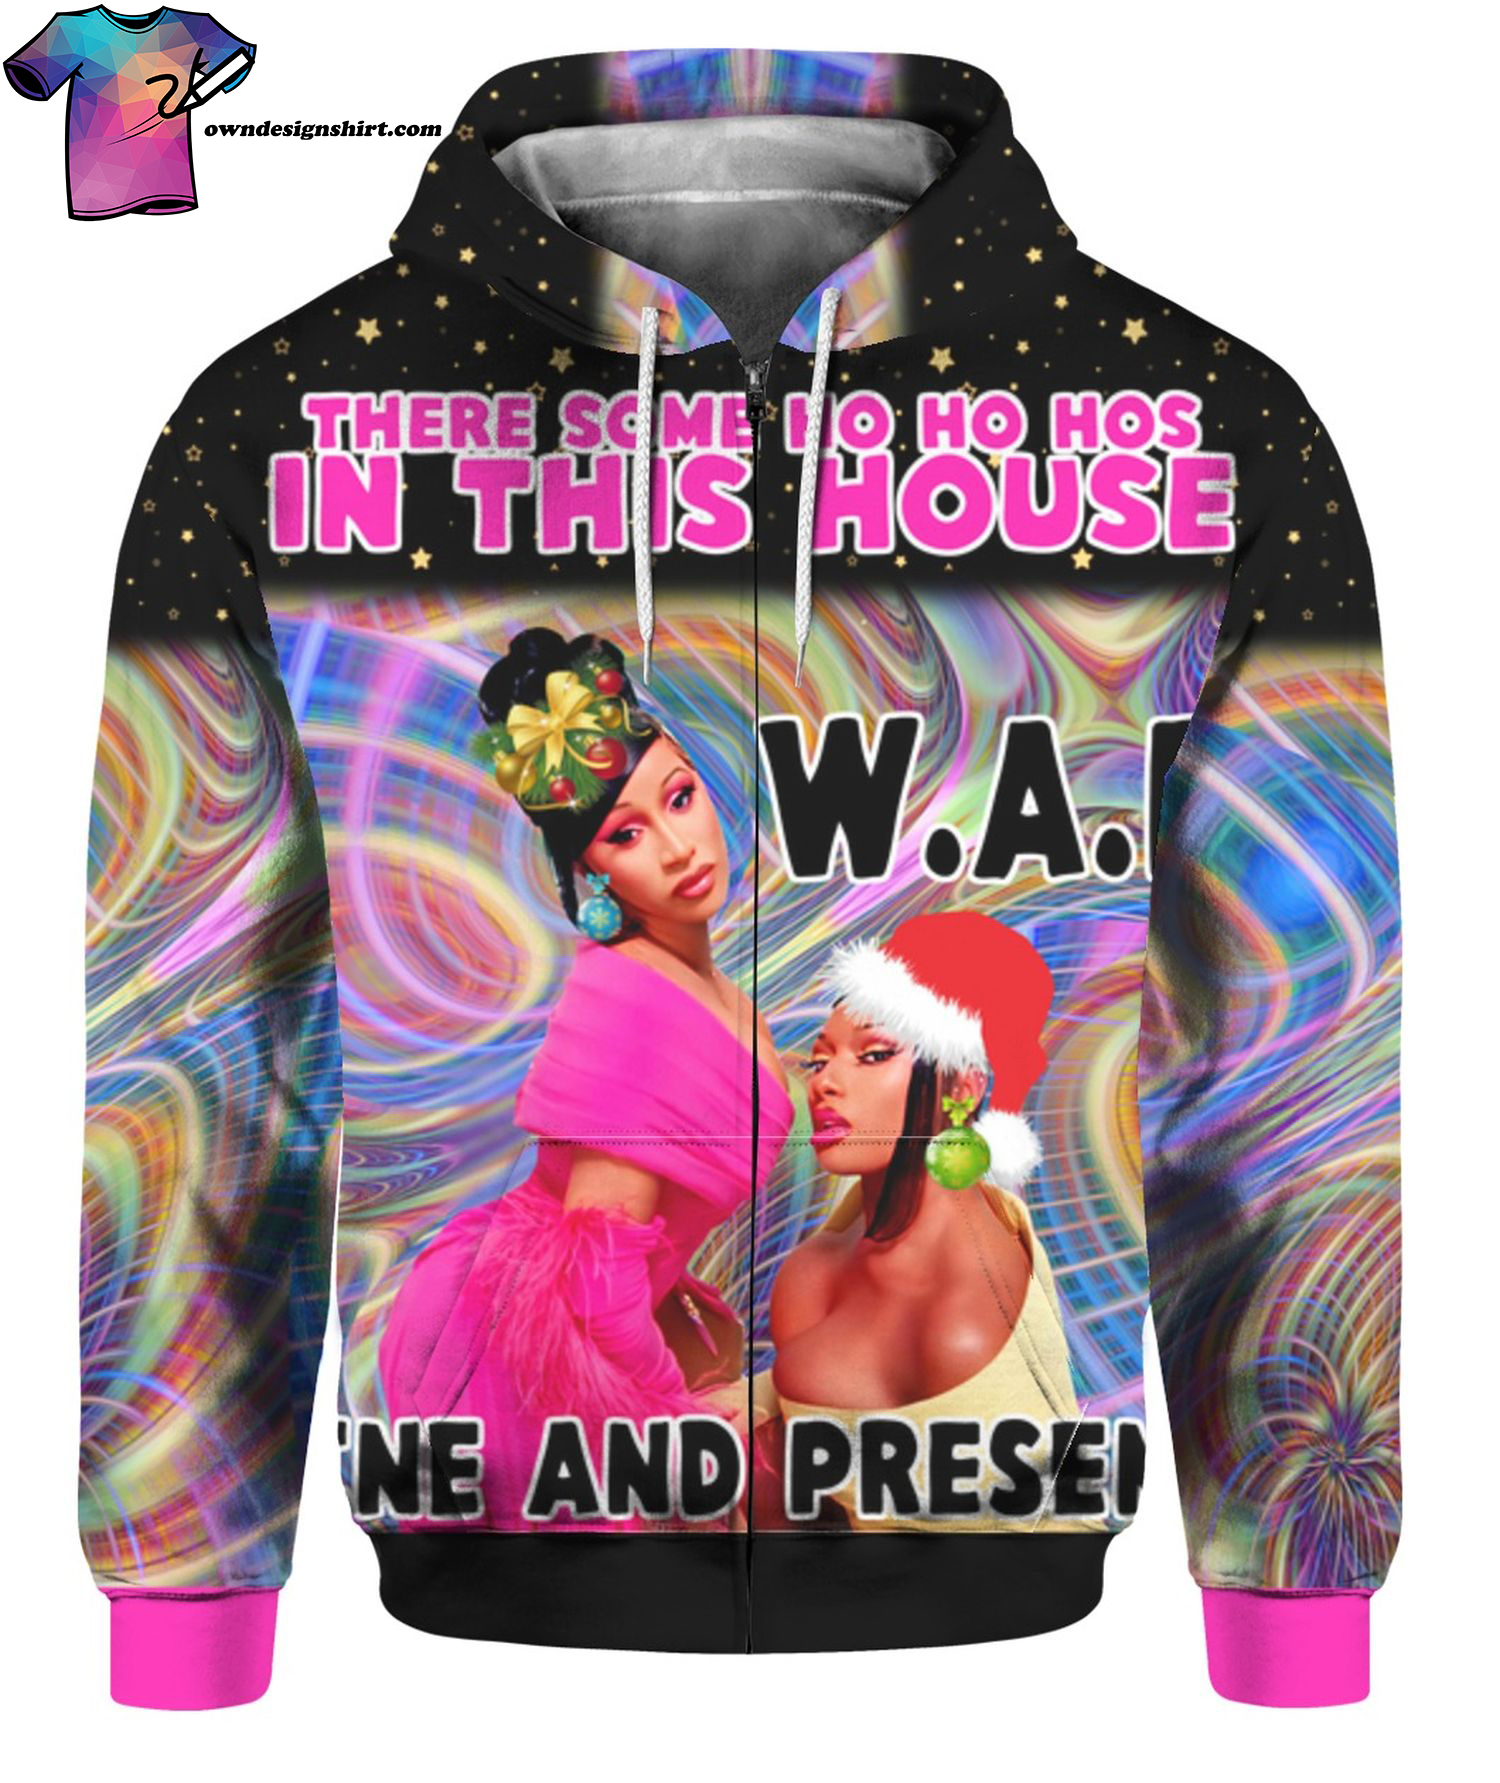 Cardi B There Some Ho Ho Hos In This House Wap Wine And Presents Full Print Zip Hoodie